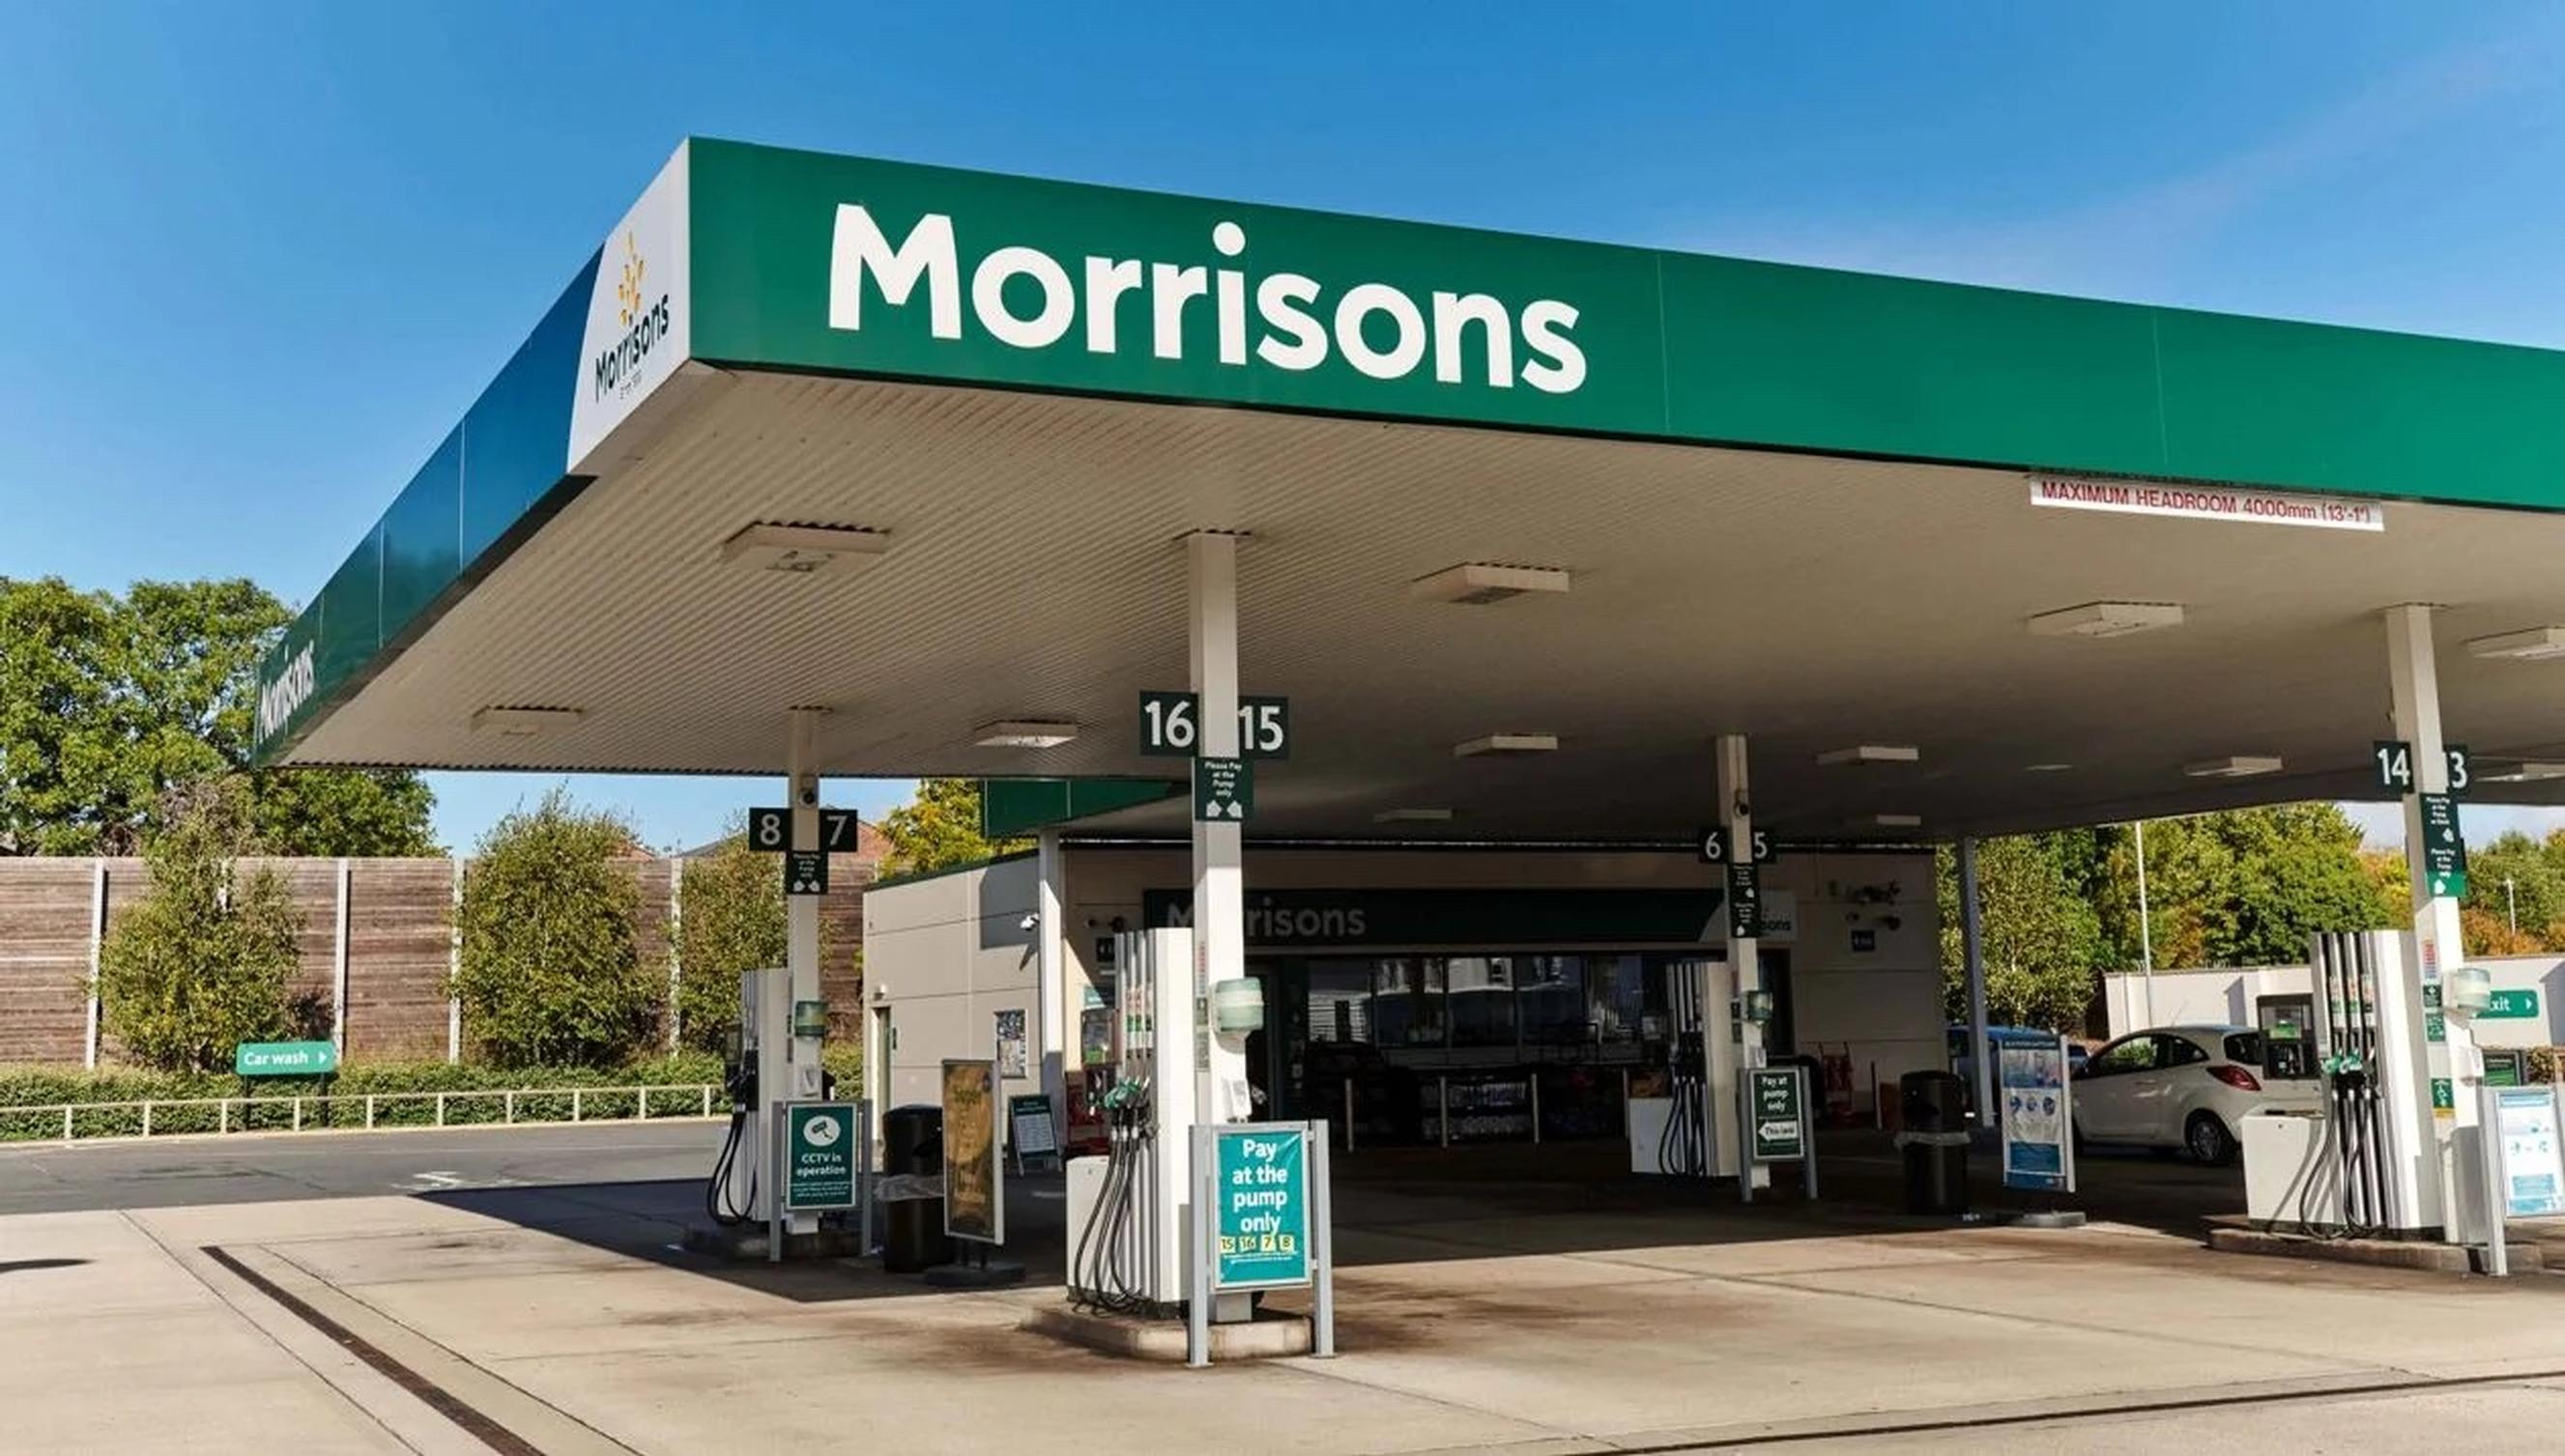 MFG will transform many Morrisons forecourts into EV charging hubs